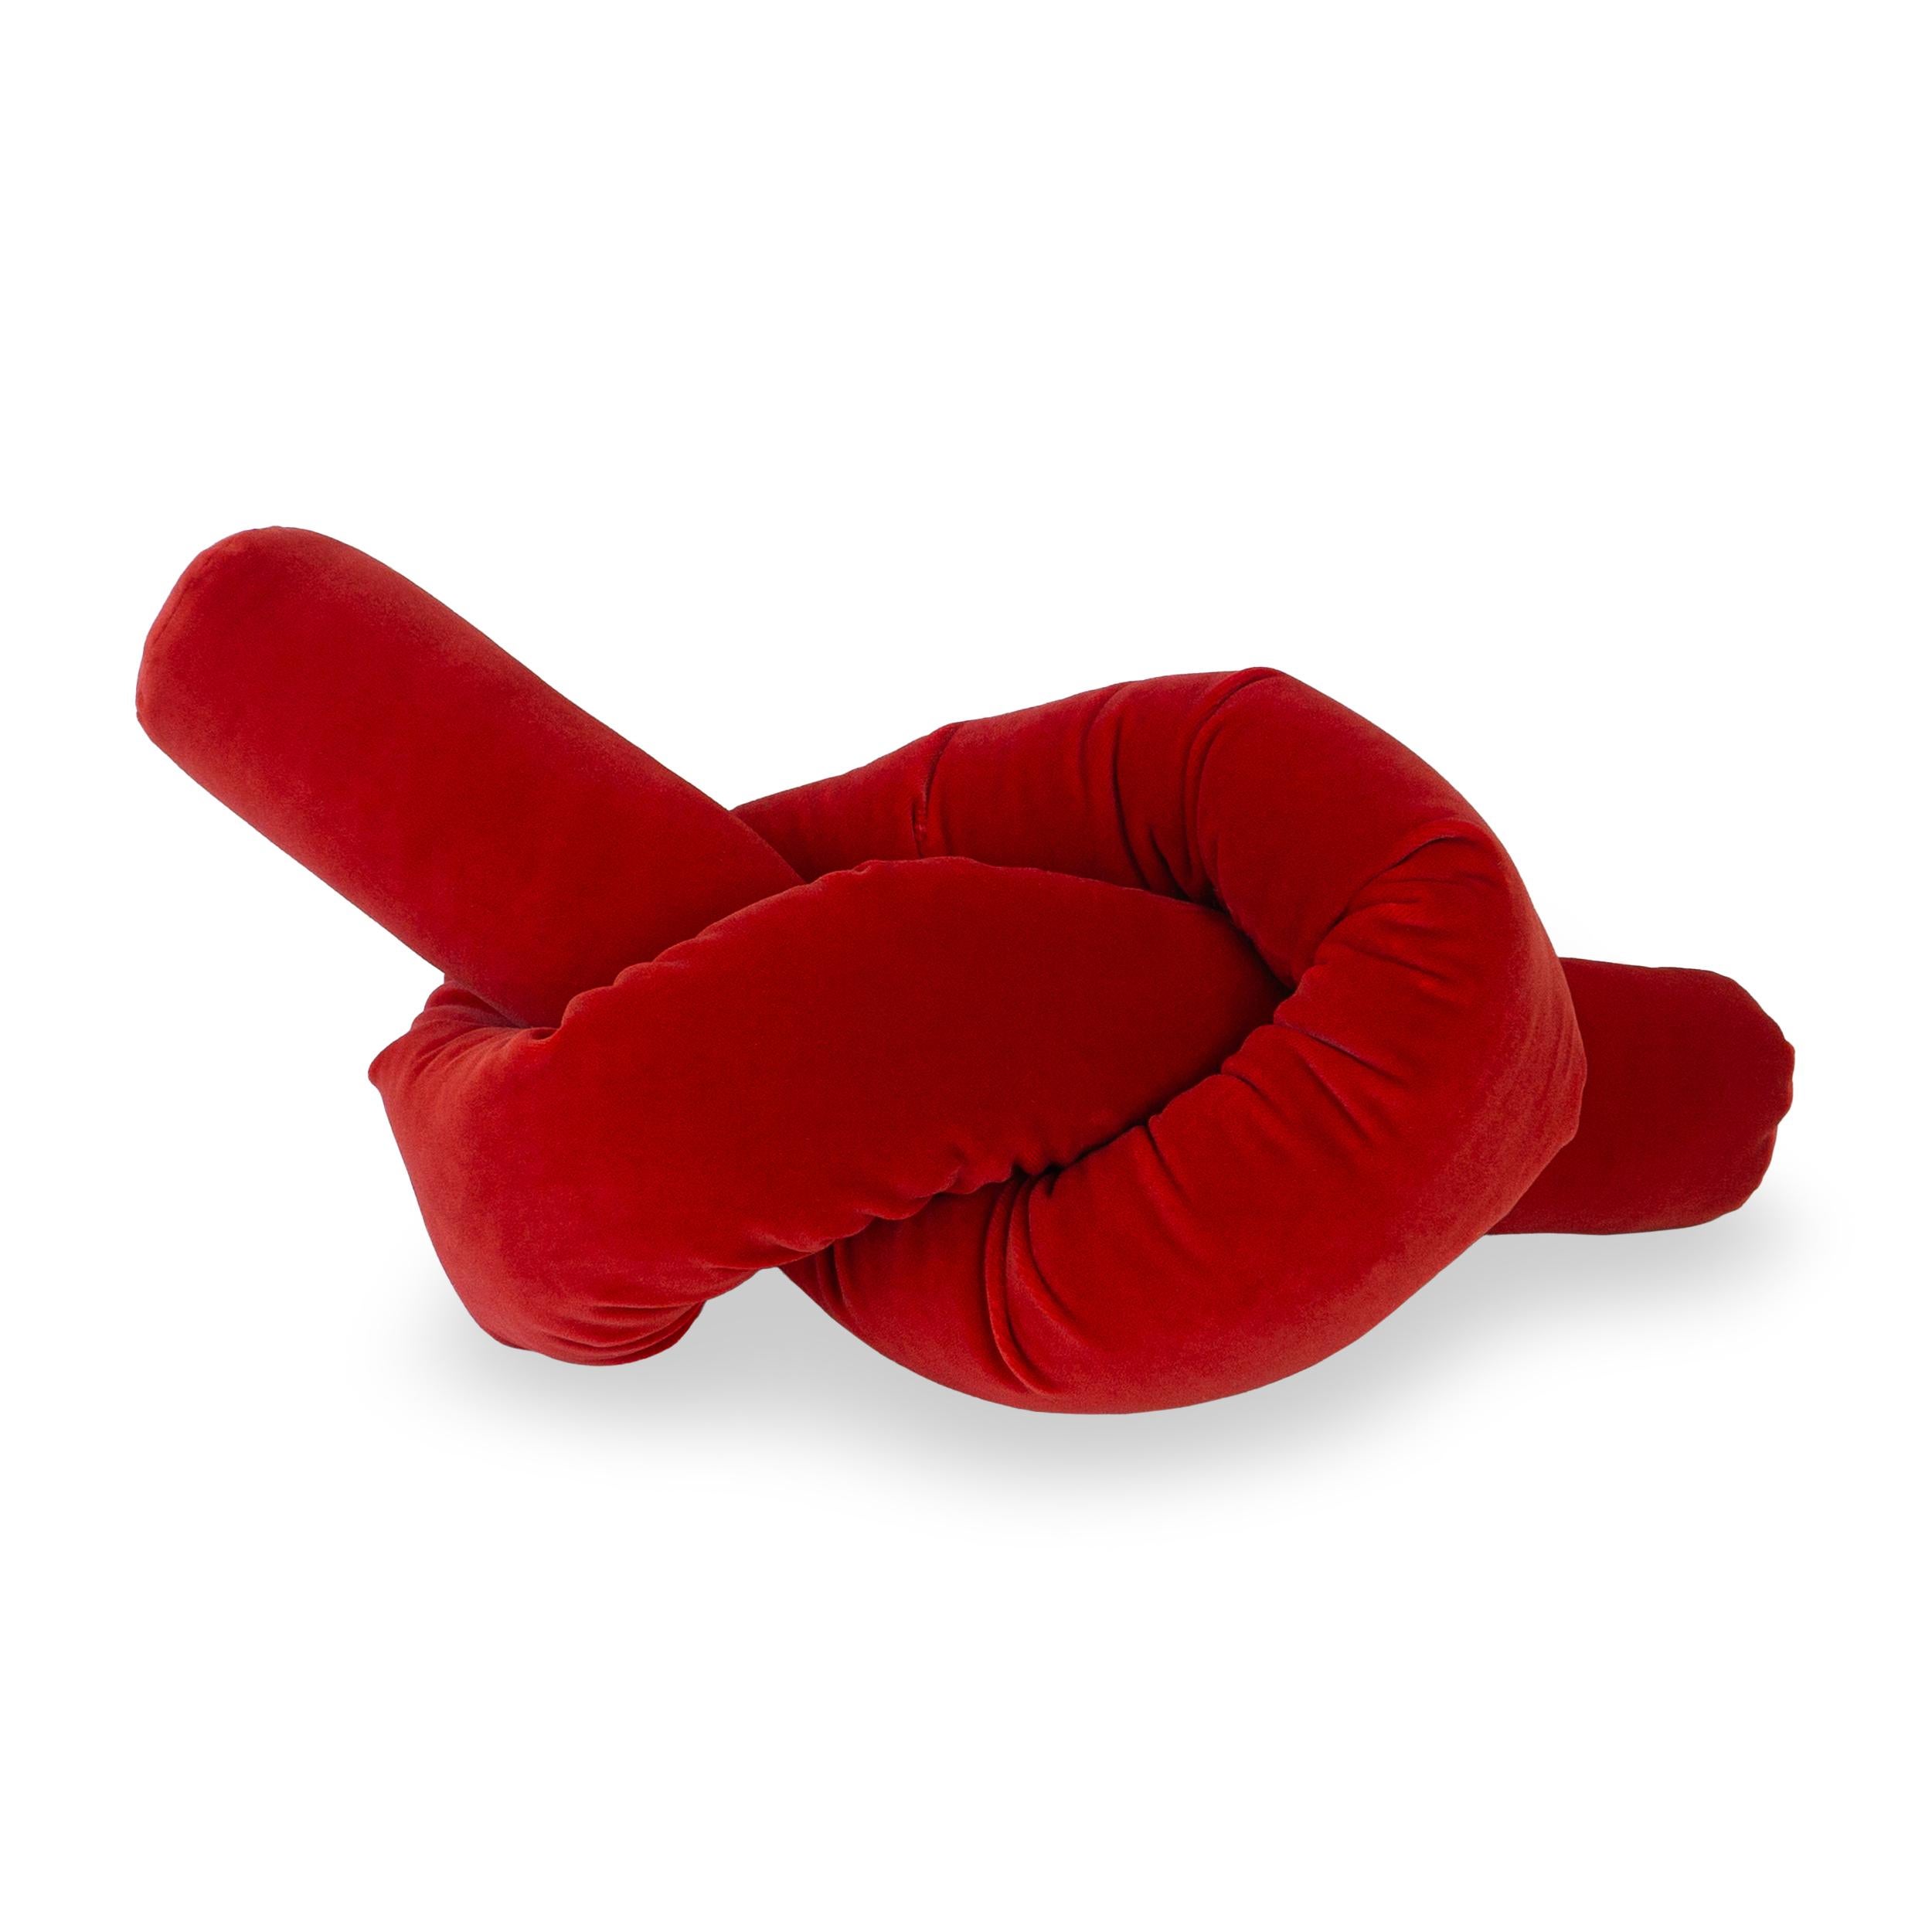 Bold and fun, the Scarlet Red Pretzel Knot Pillow is a modern decorative accent to any living space. Crafted from plush velvet, this modern knot cushion boasts a vibrant red hue and a distinctive pretzel shape, adding a tubular twist to your decor.